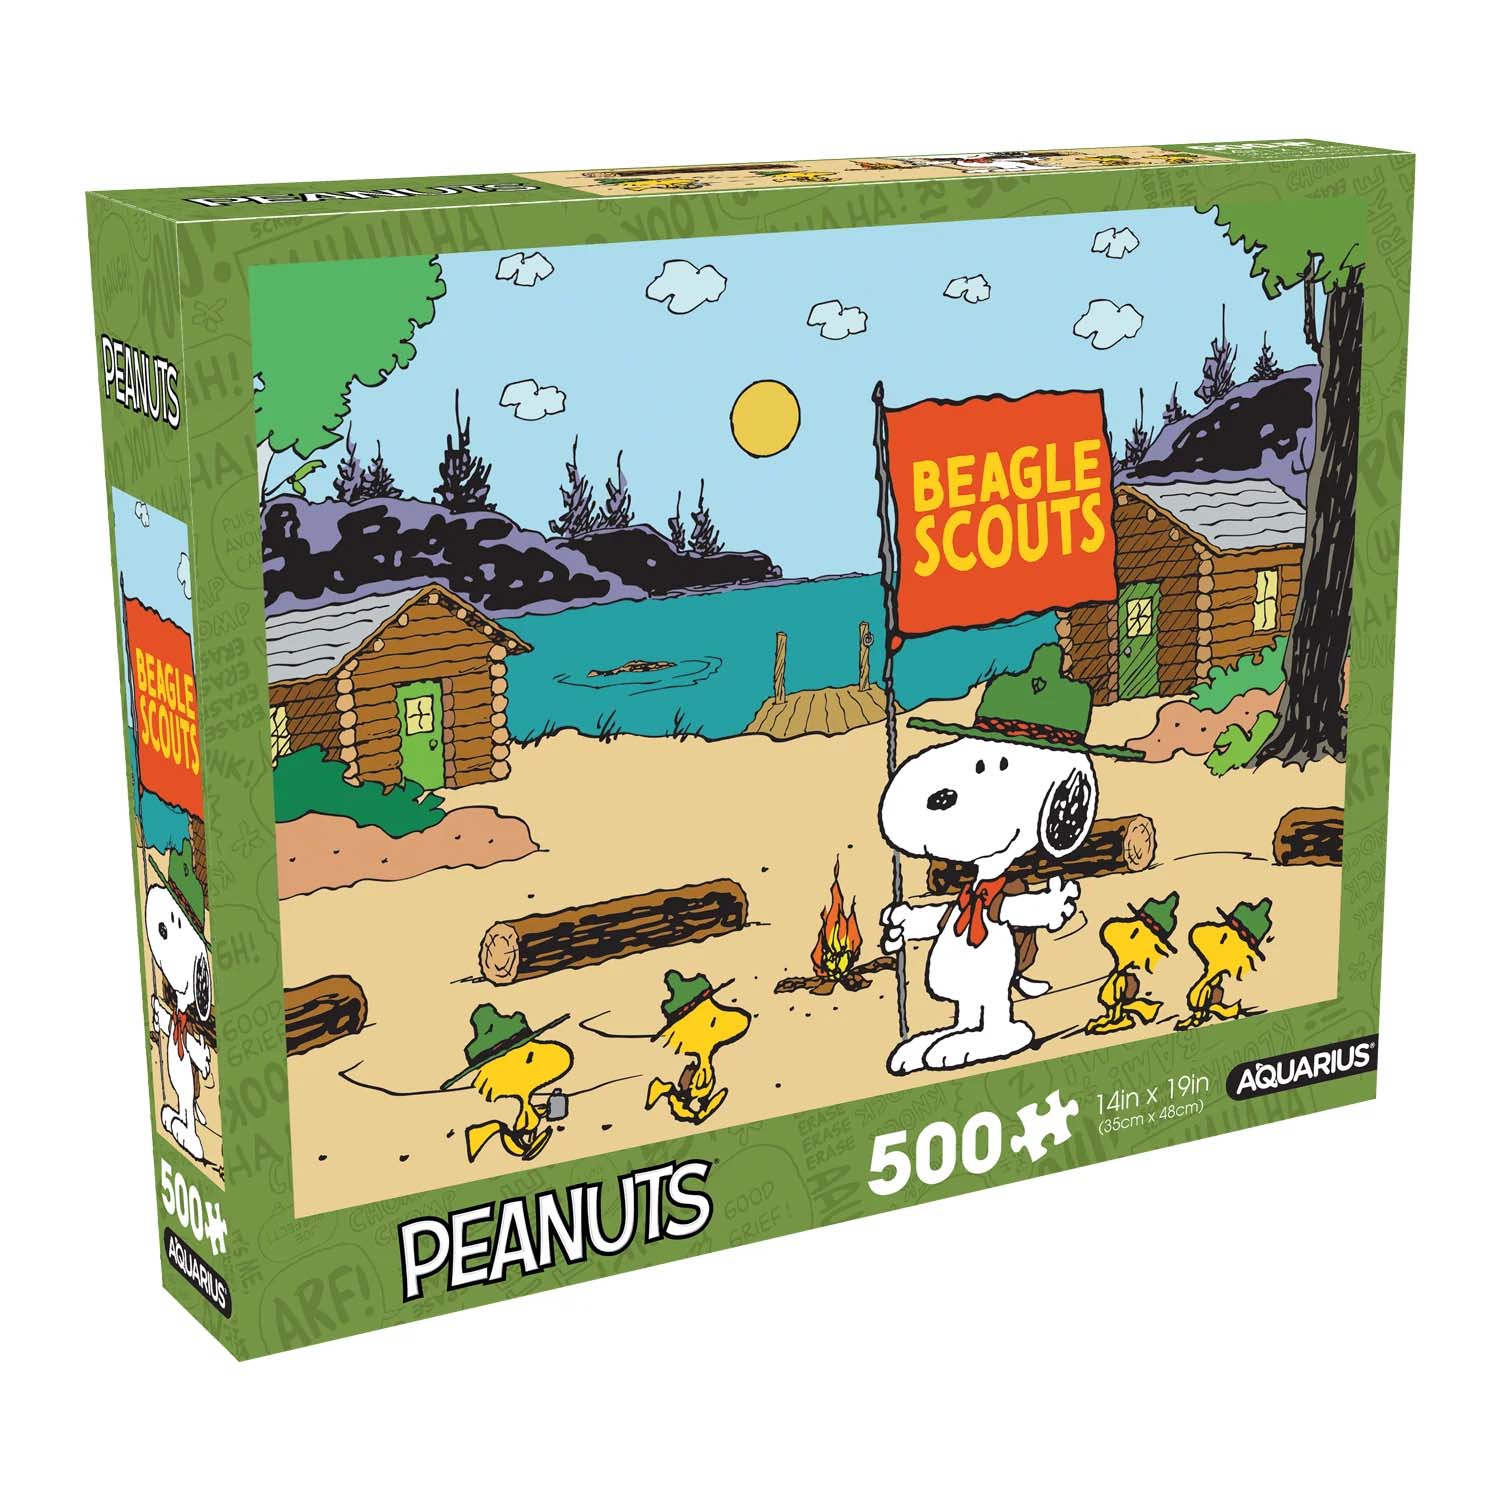 Peanuts Beagle Scouts Movies & TV Jigsaw Puzzle